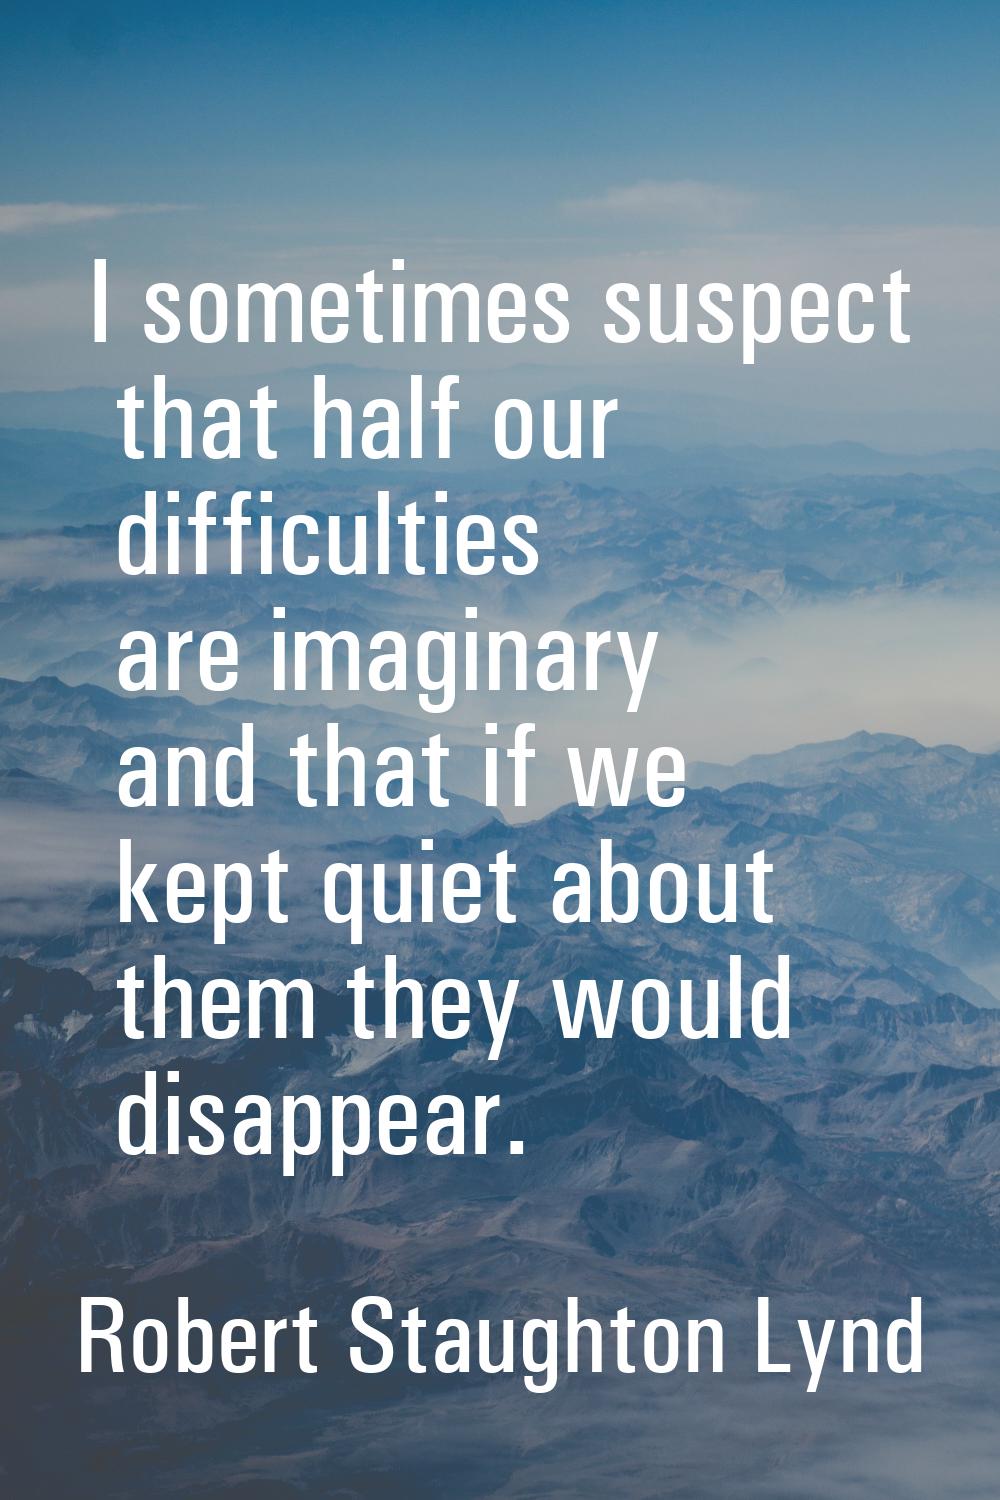 I sometimes suspect that half our difficulties are imaginary and that if we kept quiet about them t